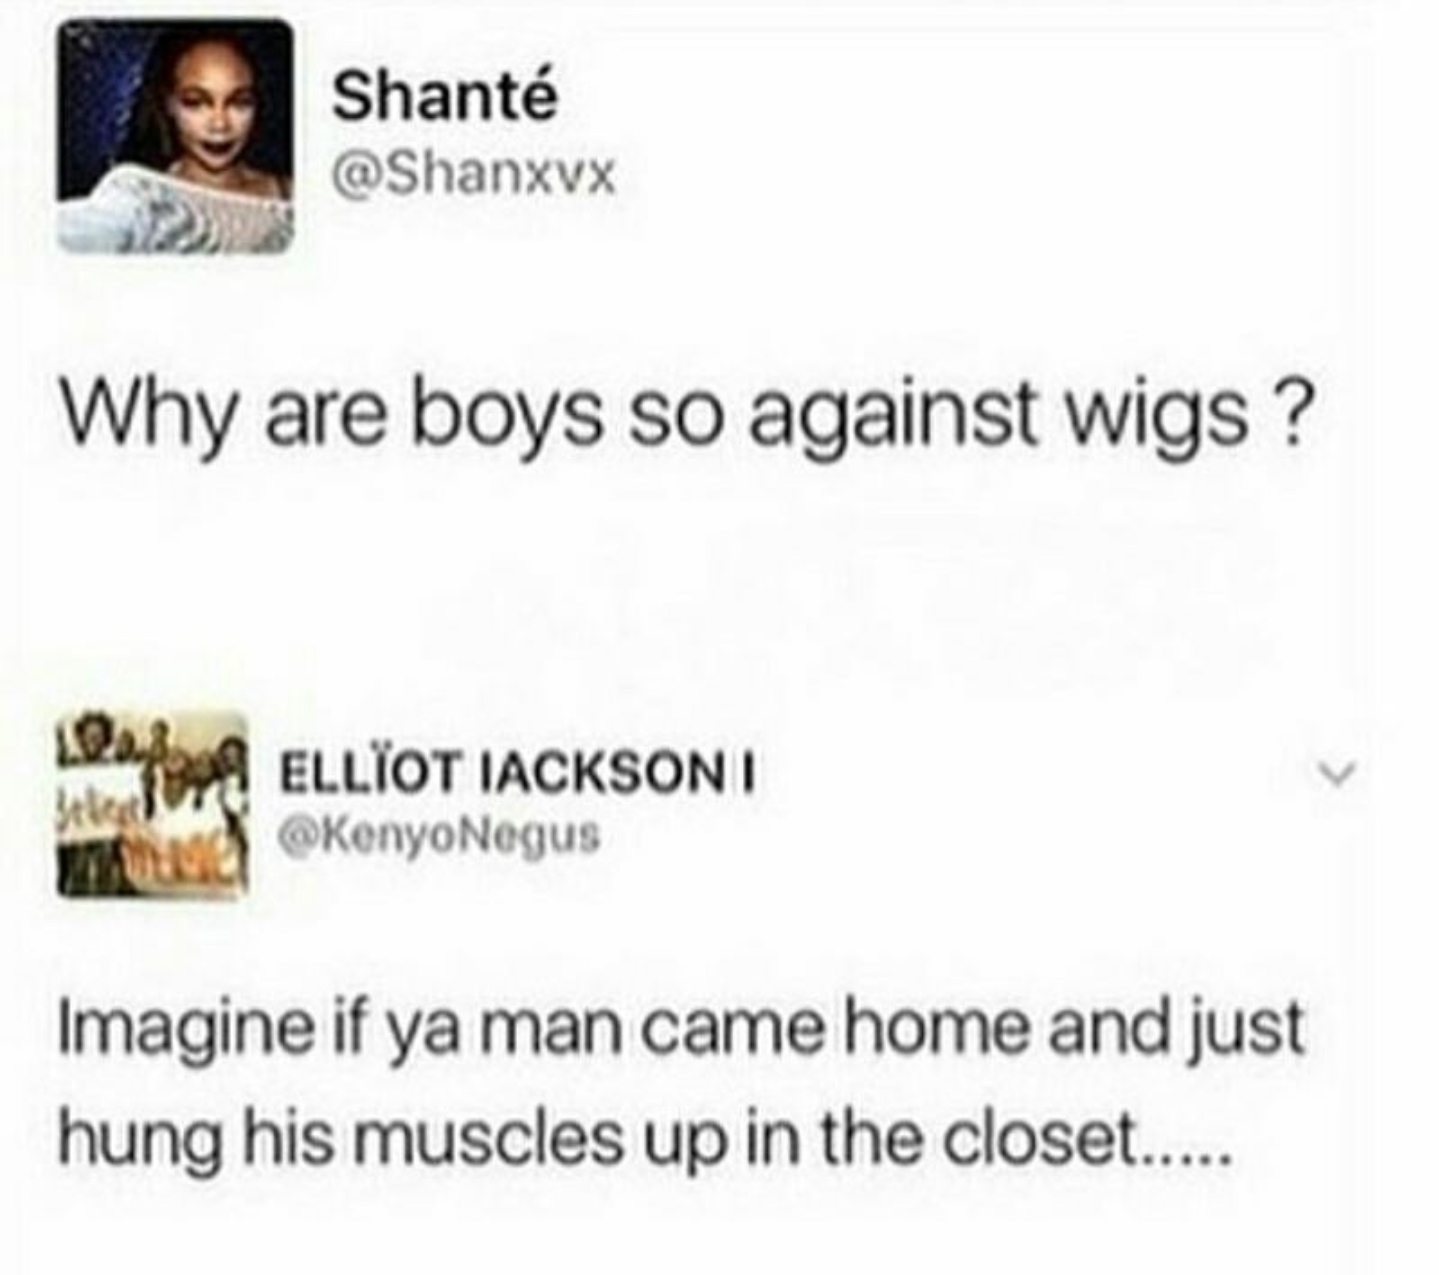 Girl asks why boys are so against wigs and dude responds to imagine if a man came home and just hung up his muscles.